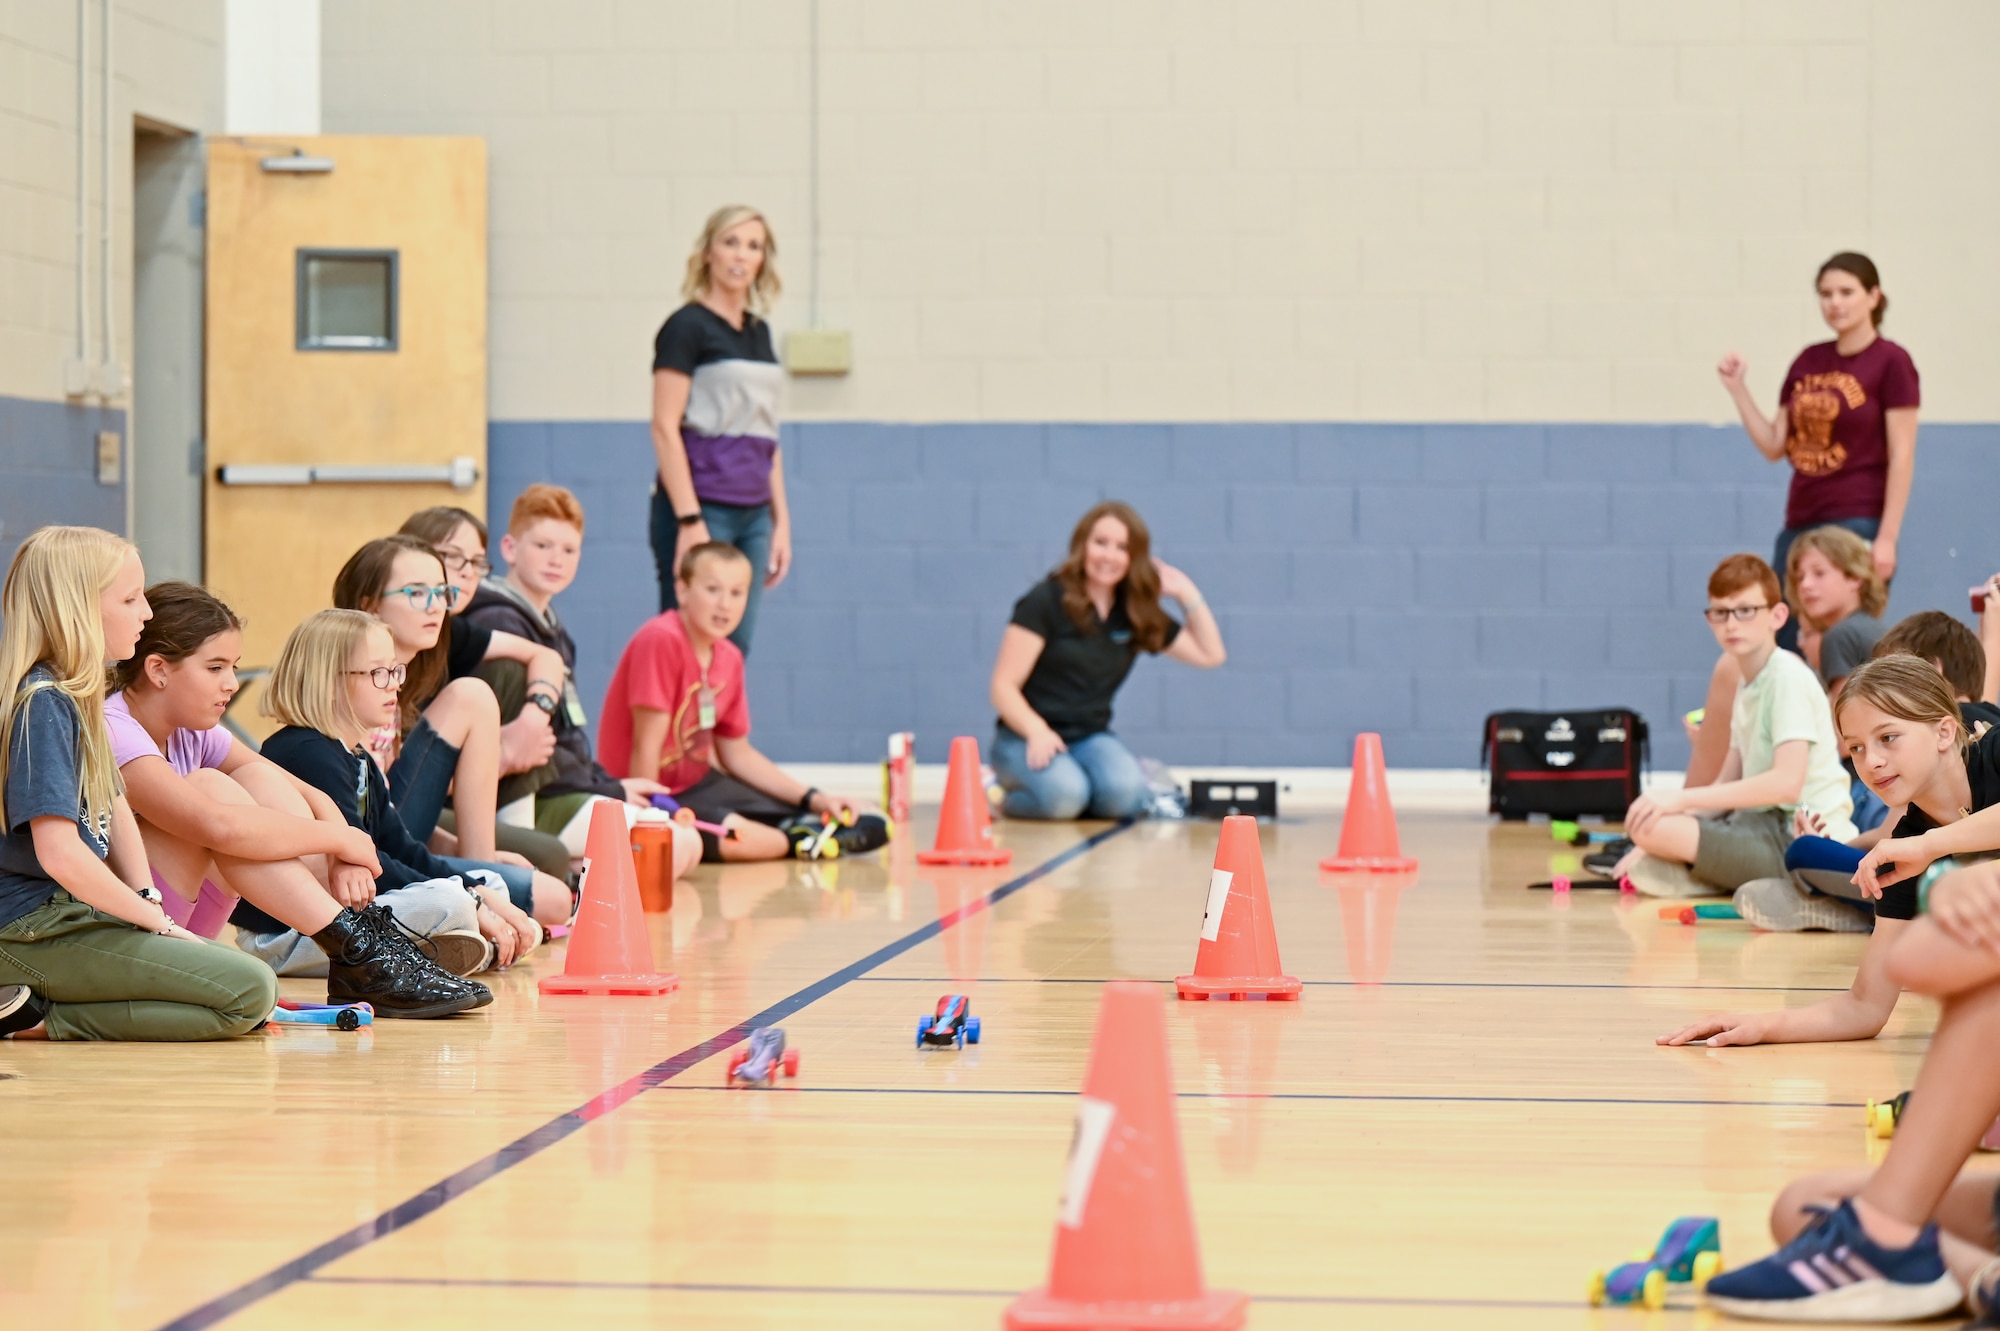 Two CO2 dragsters race on the gym floor between orange cones flanked on both sides by students watching on.